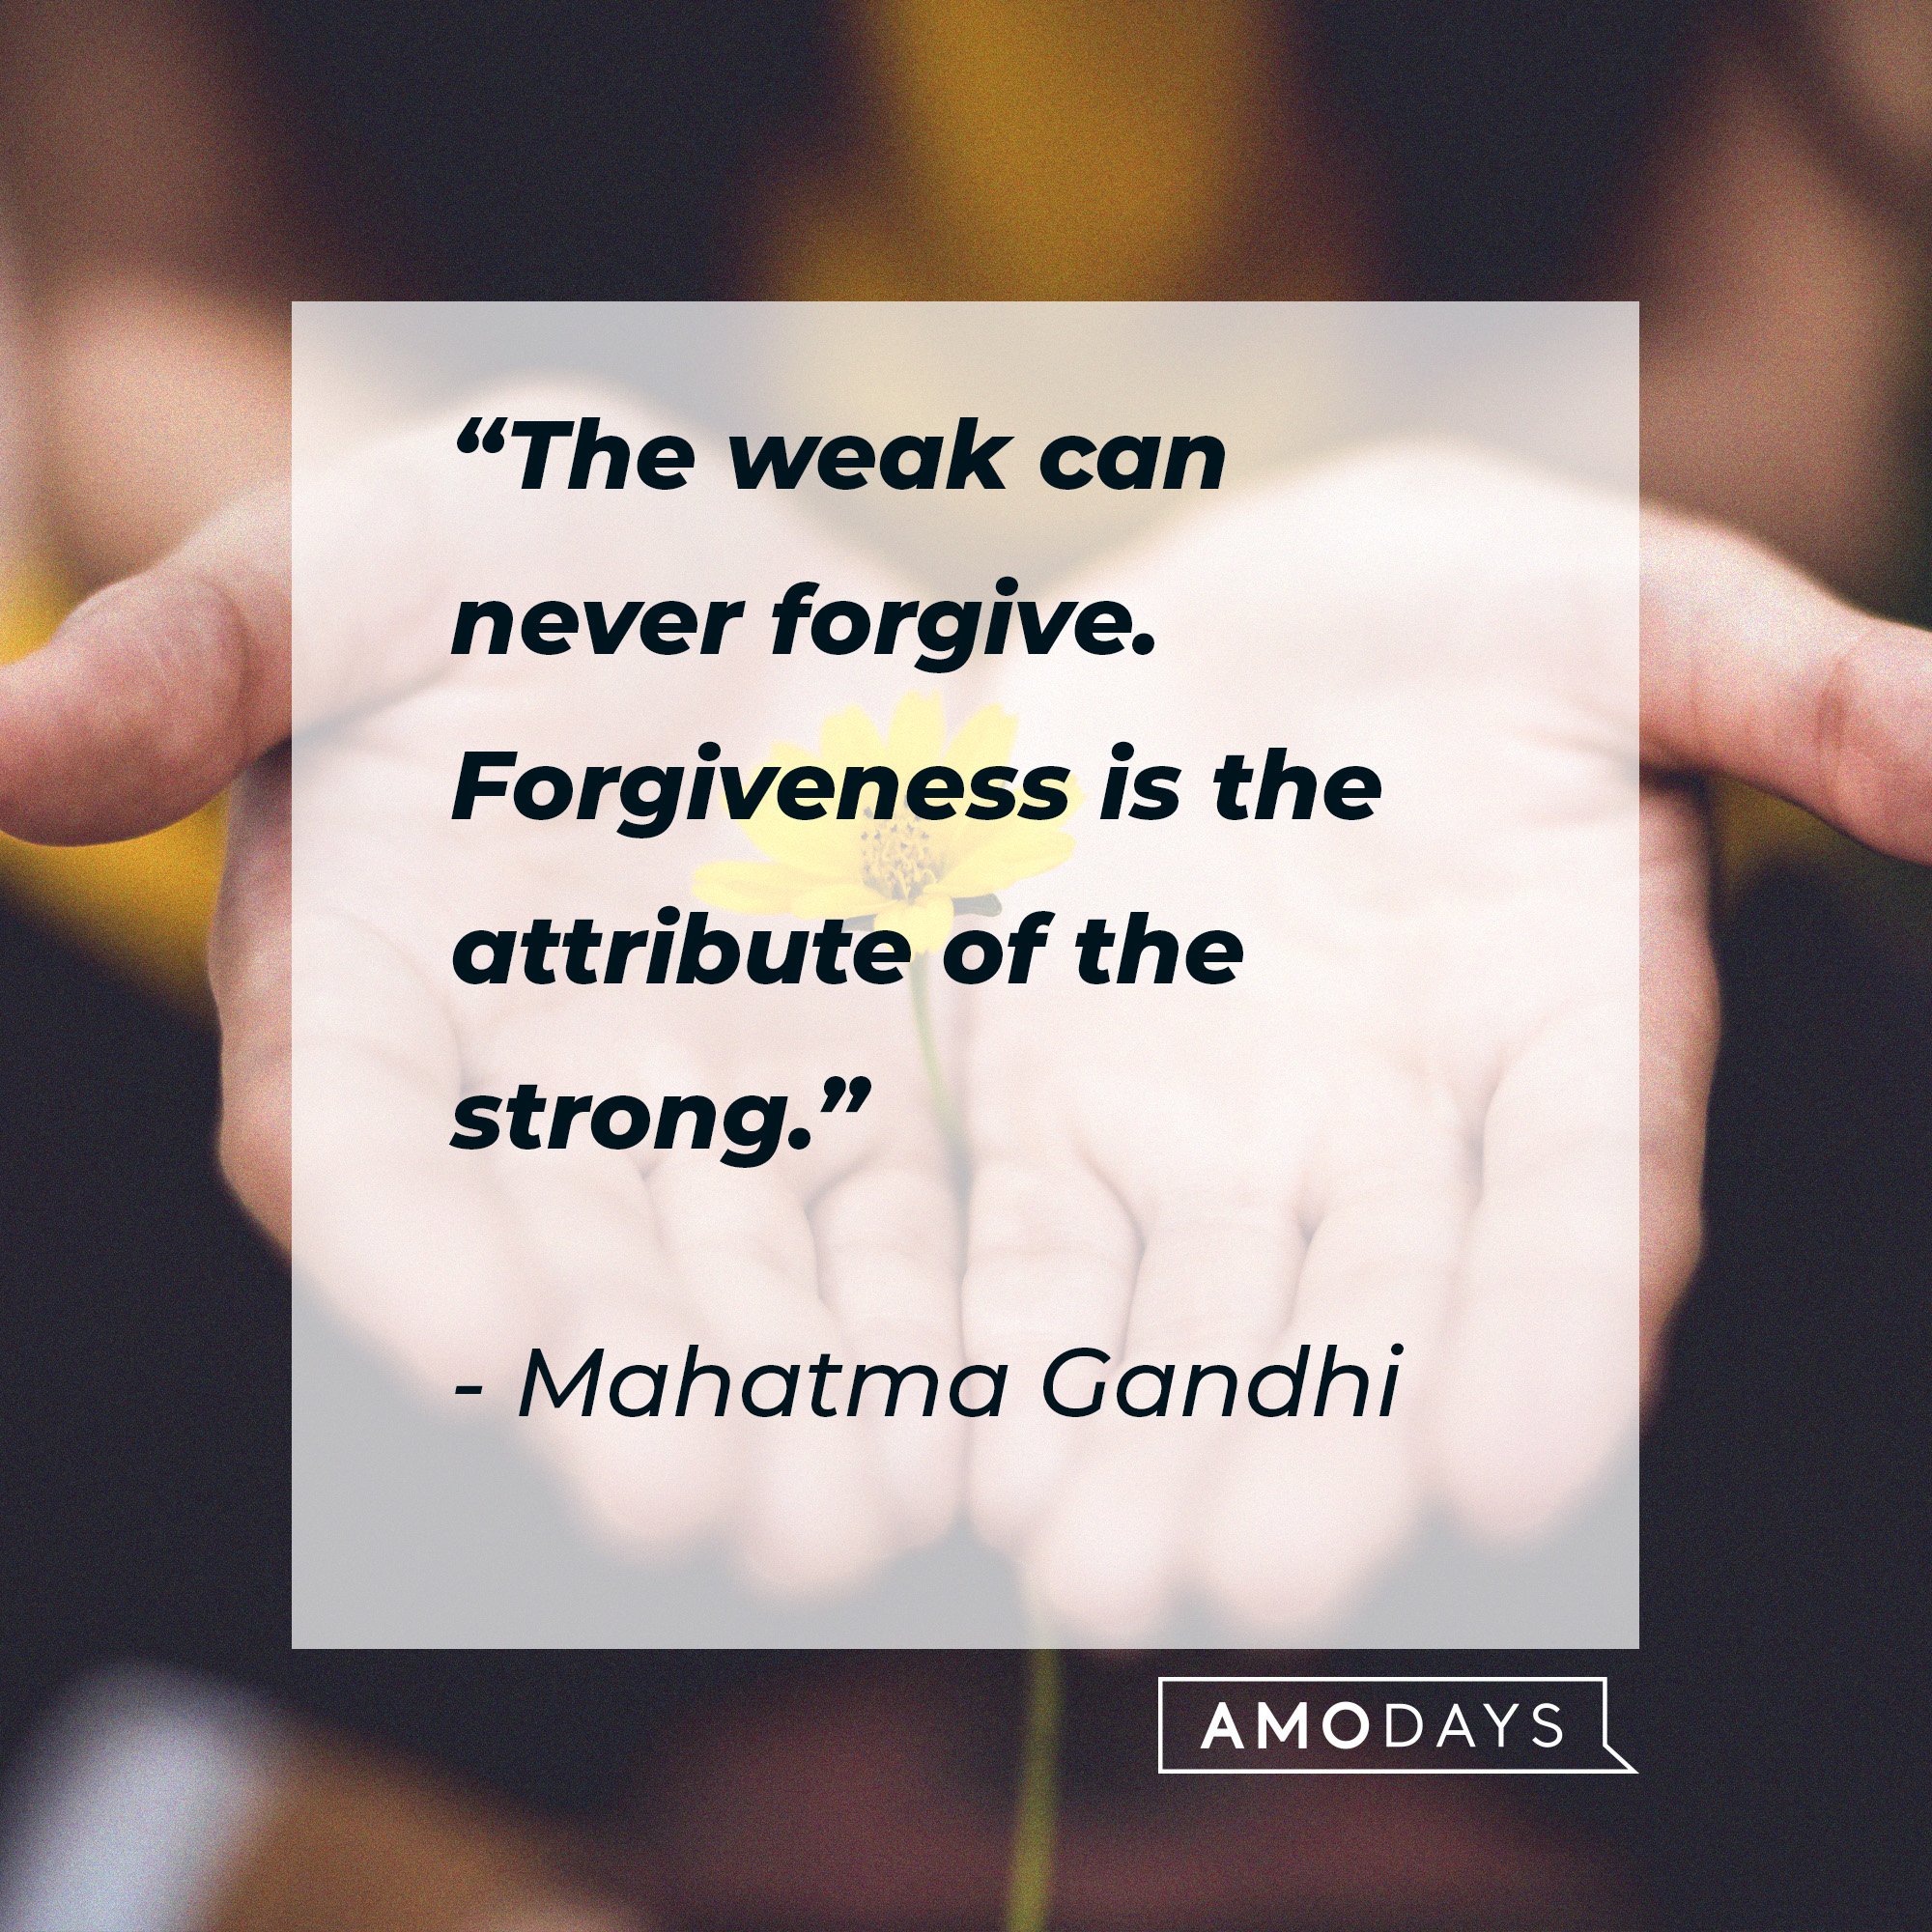 Mahatma Gandhi's quote: “The weak can never forgive. Forgiveness is the attribute of the strong.” | Image: AmoDays